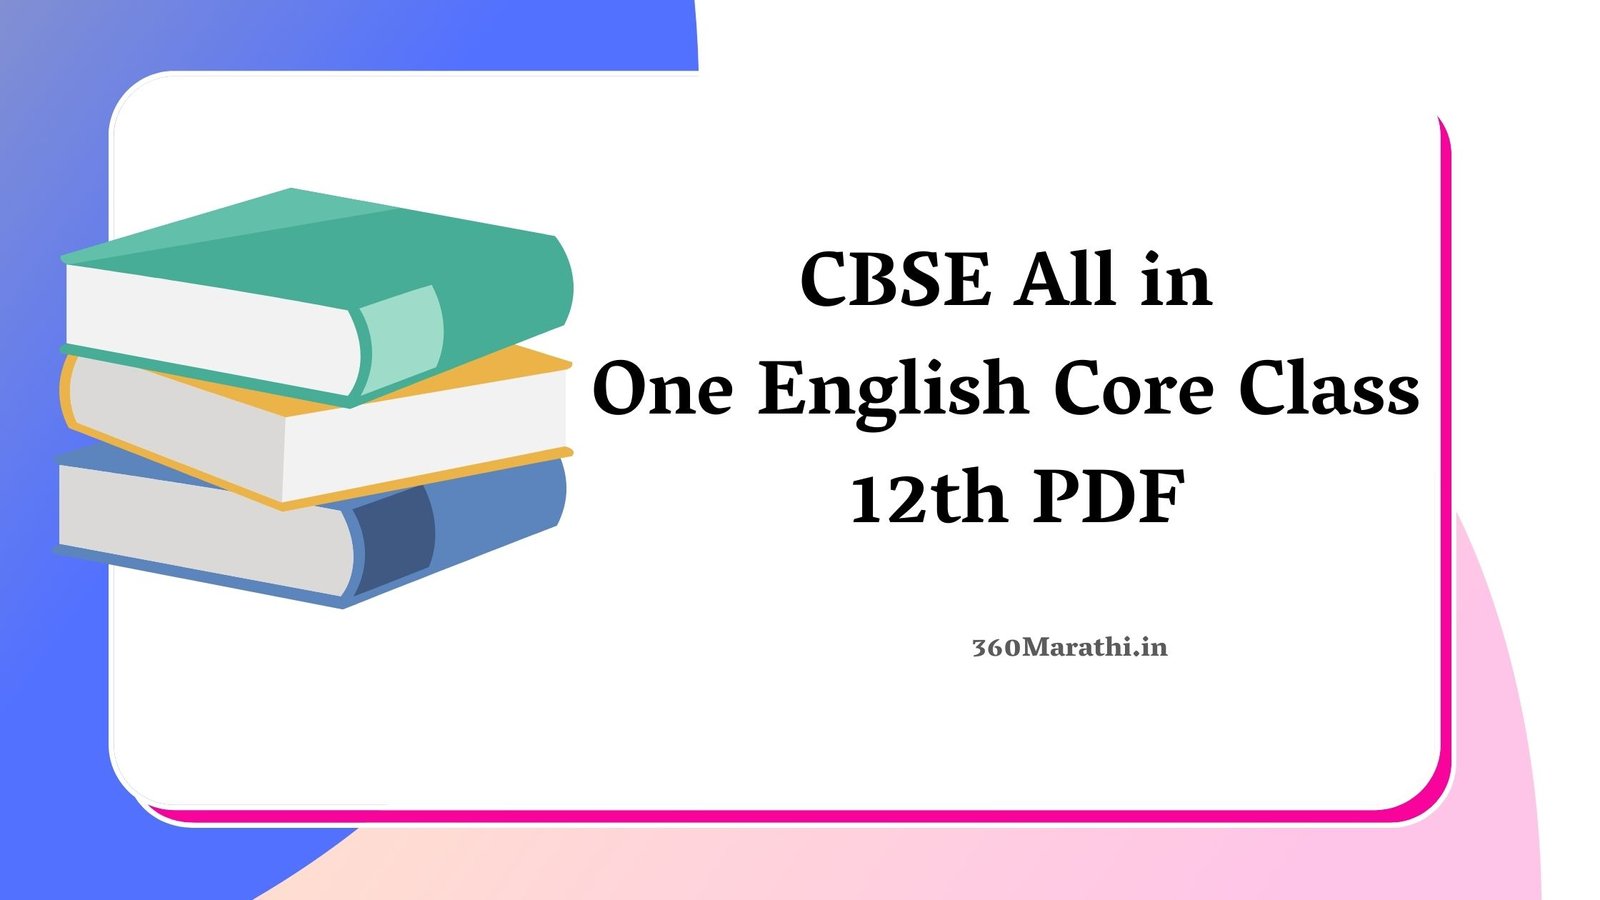 CBSE All in One English Core Class 12th PDF